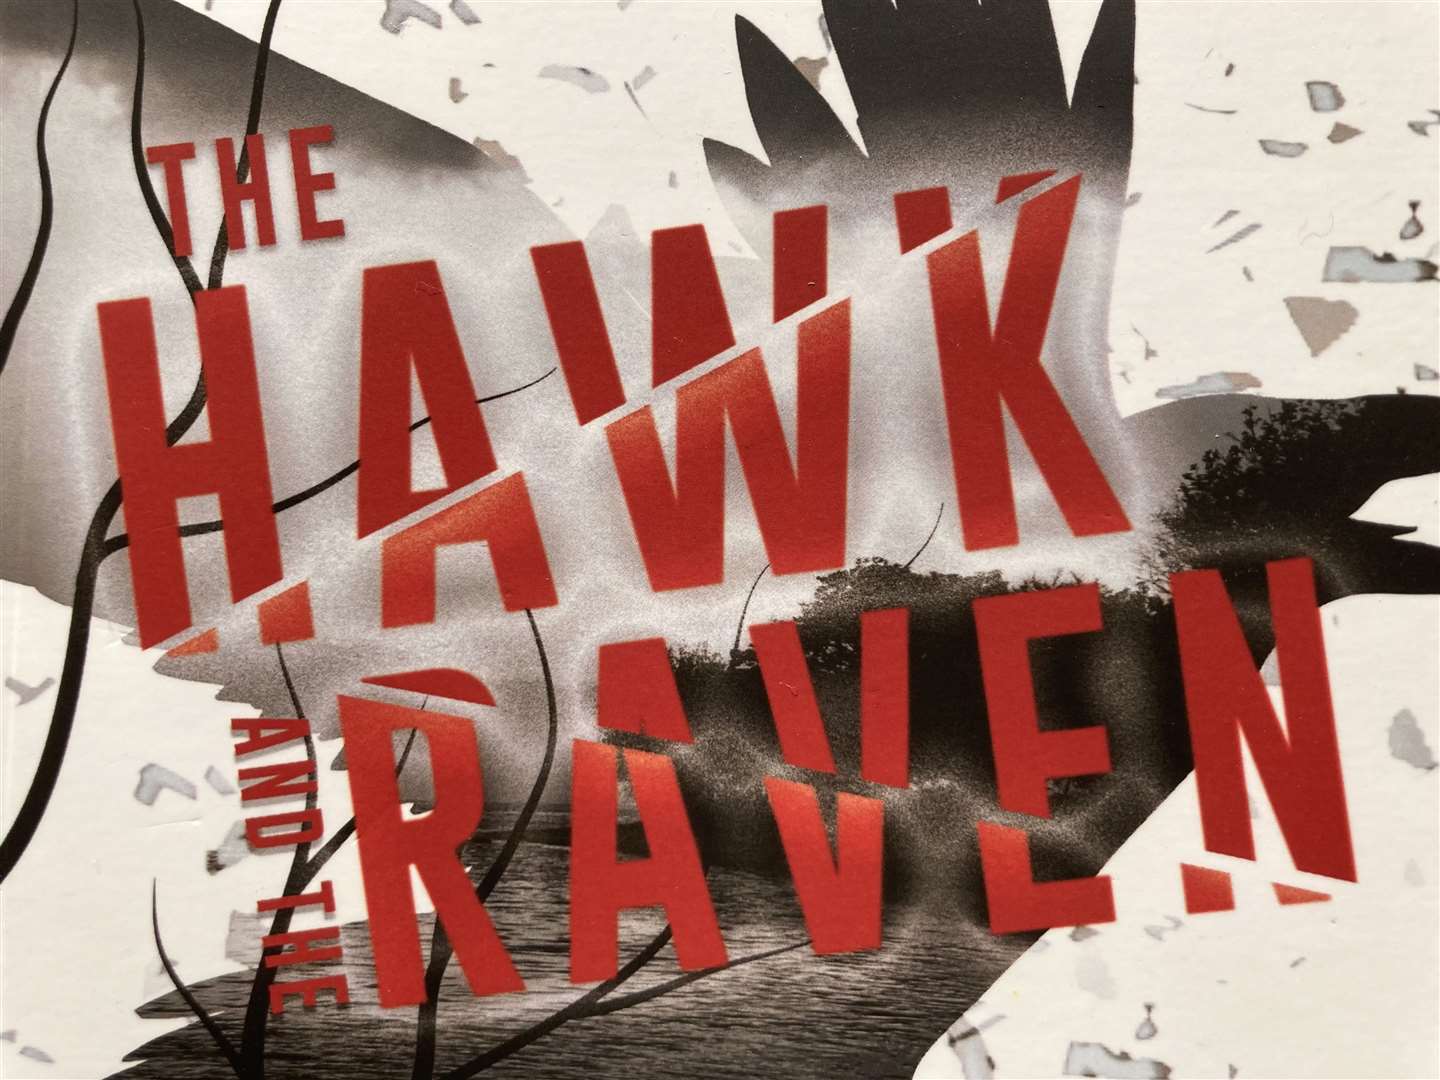 The Hawk and the Raven by Sittingbourne author Stacey Dighton